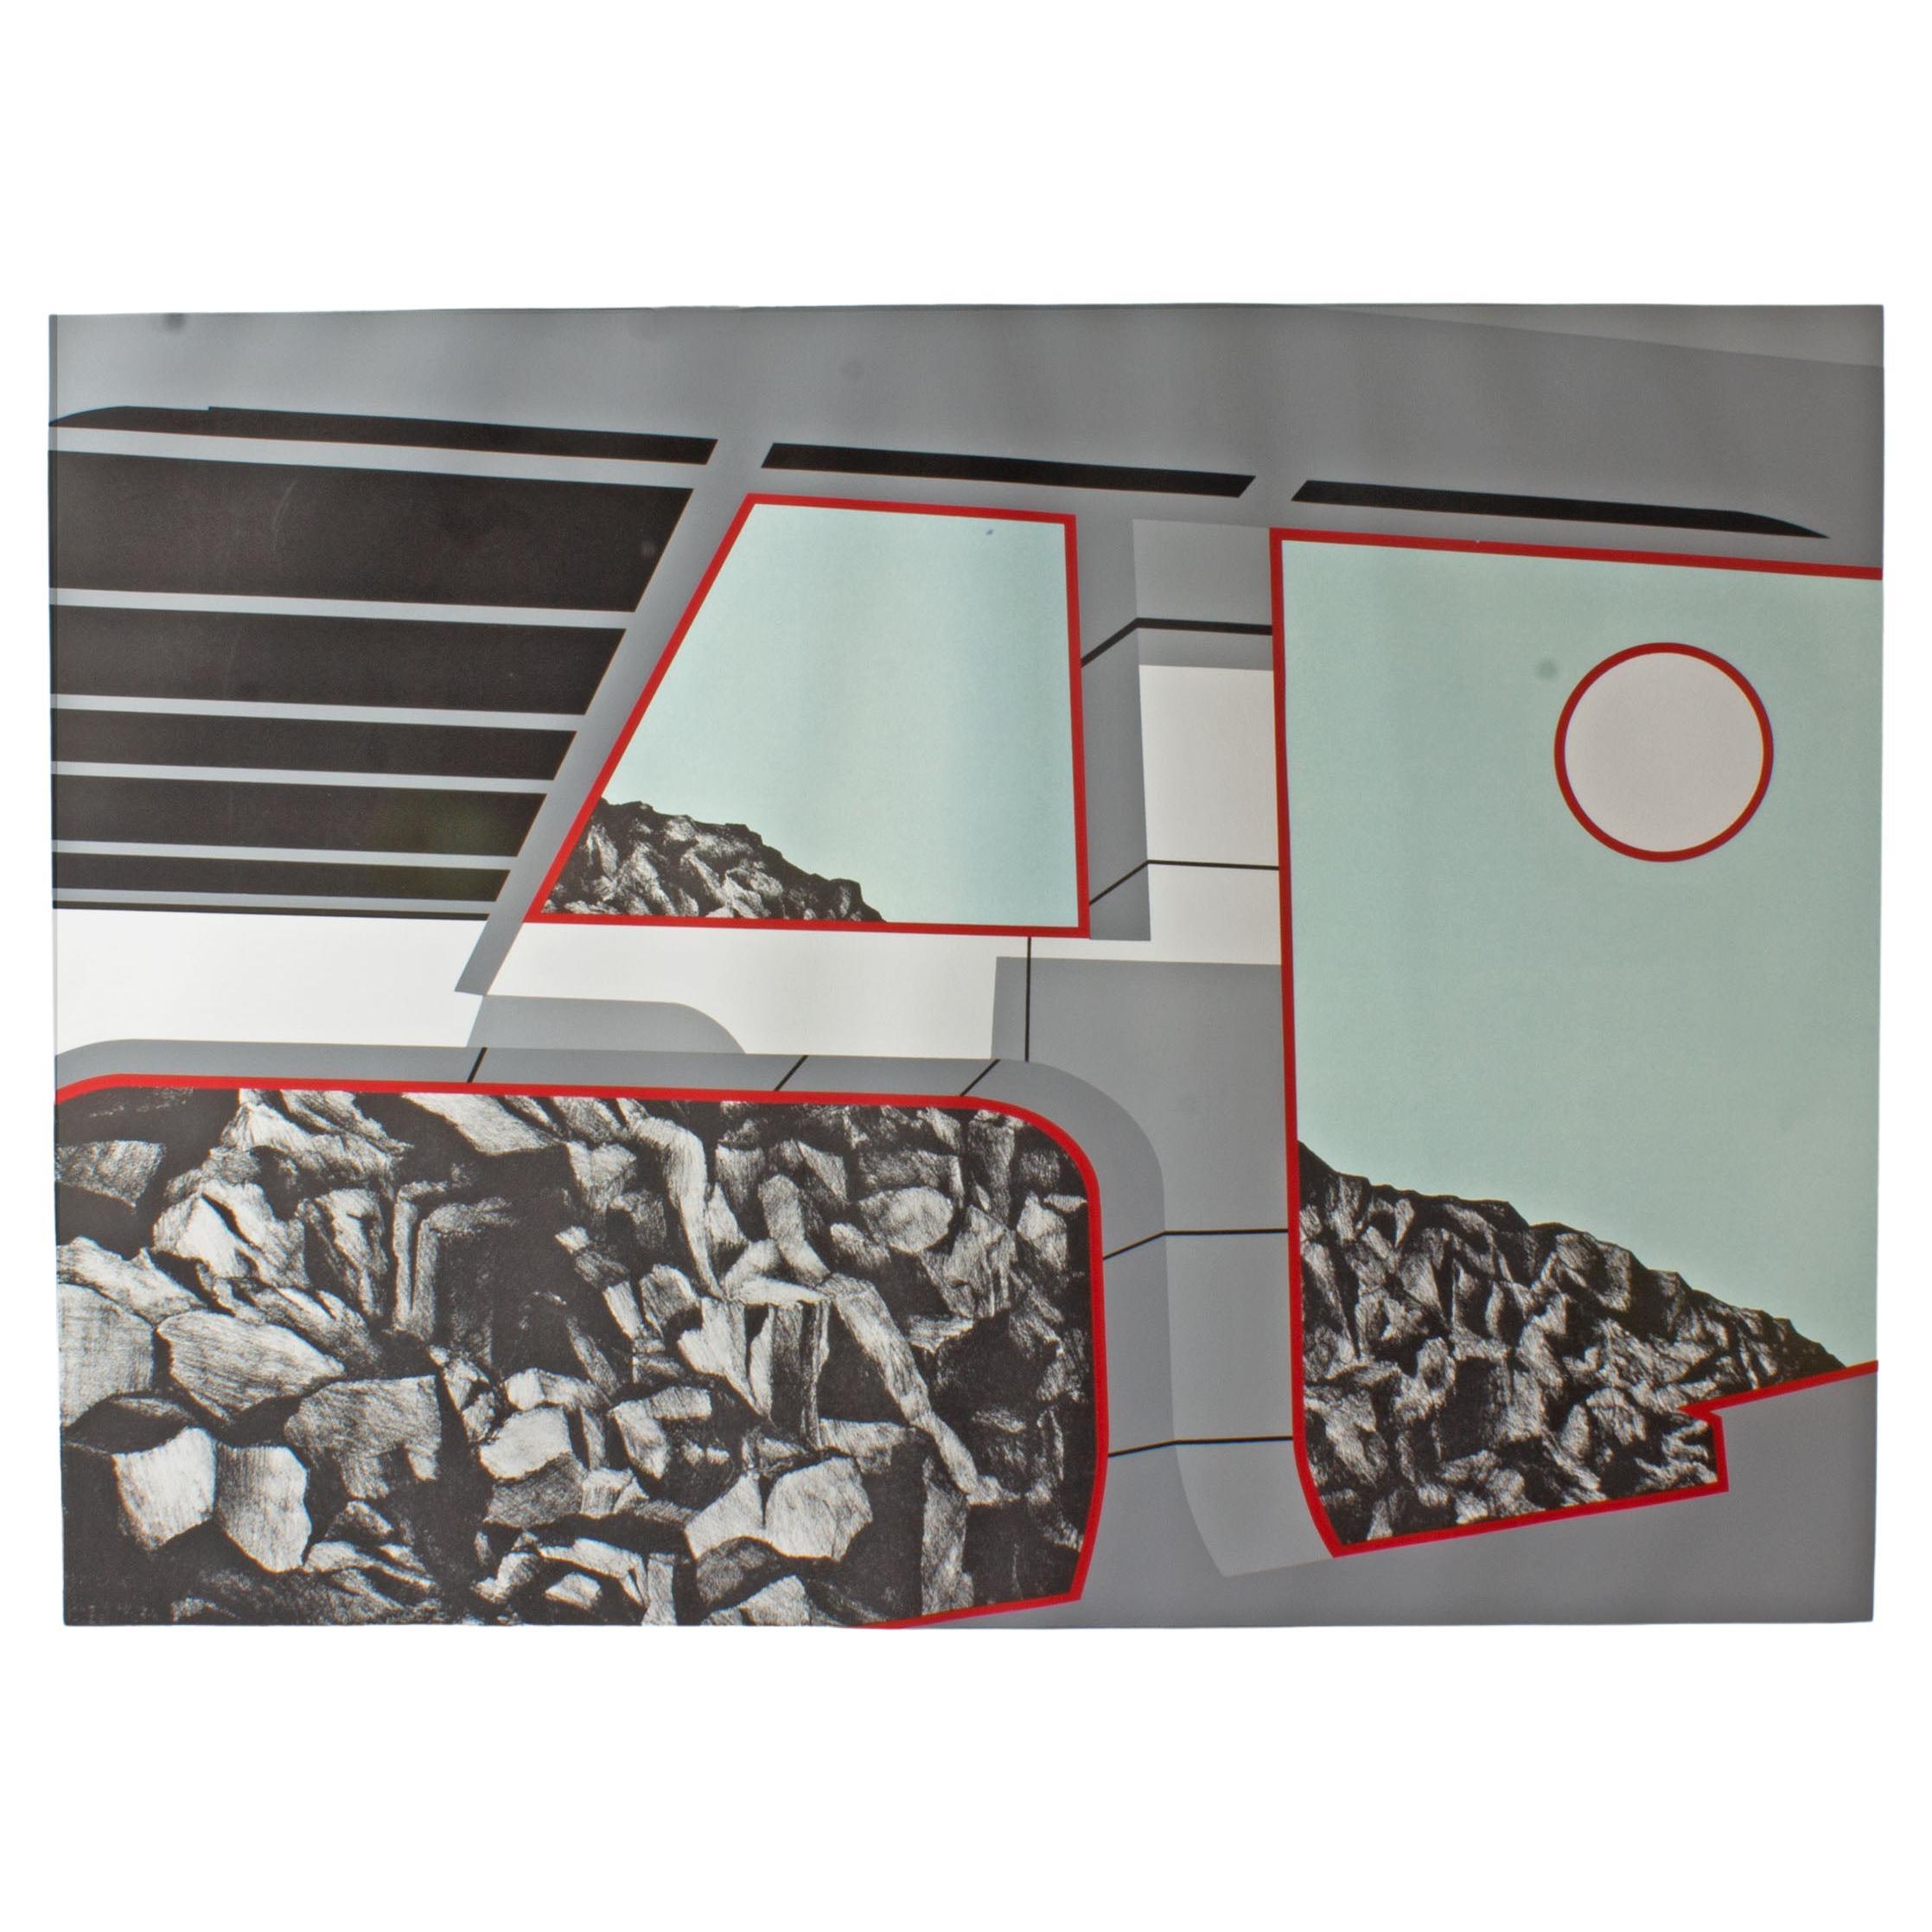 A 1978 artist's proof serigraph print on paper by American artist and printmaker Allan d'Arcangelo(1930-1998). This light blue, gray, black, red and white Pop Art print depicts a rocky view from the interior of a transportation vehicle. Hard